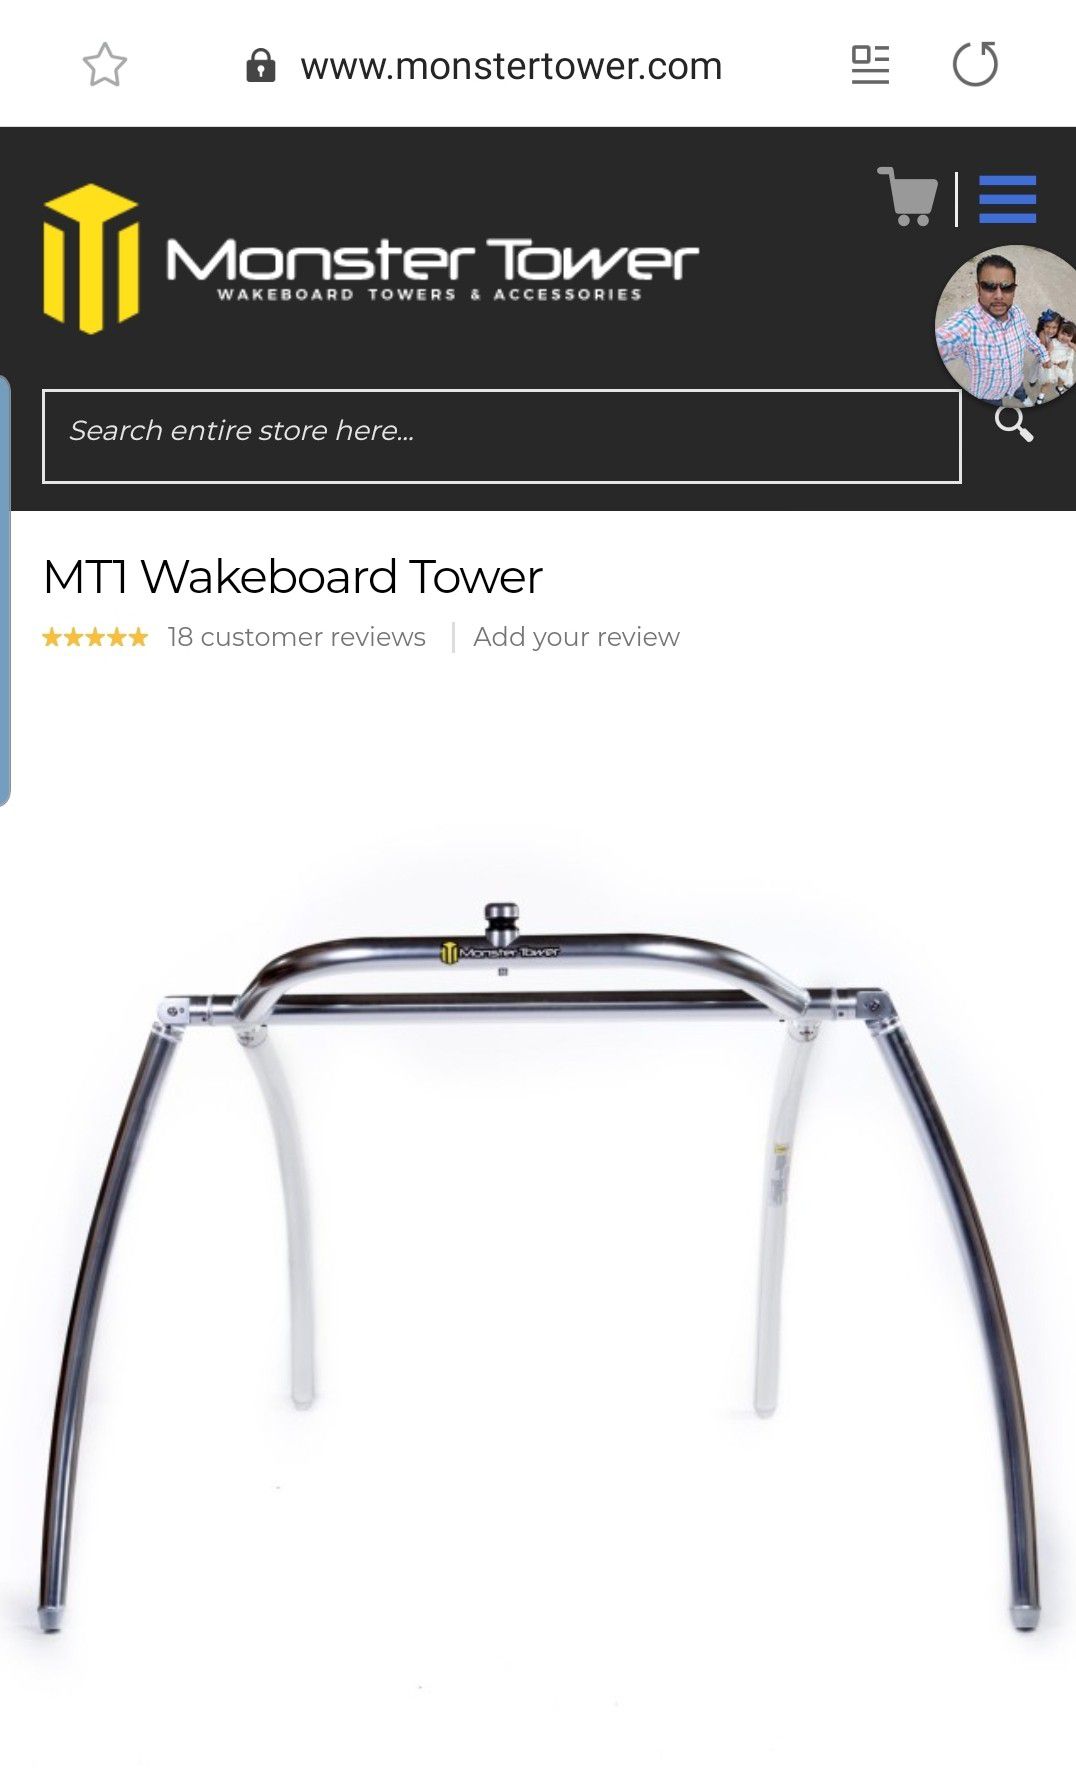 Wakeboard tower